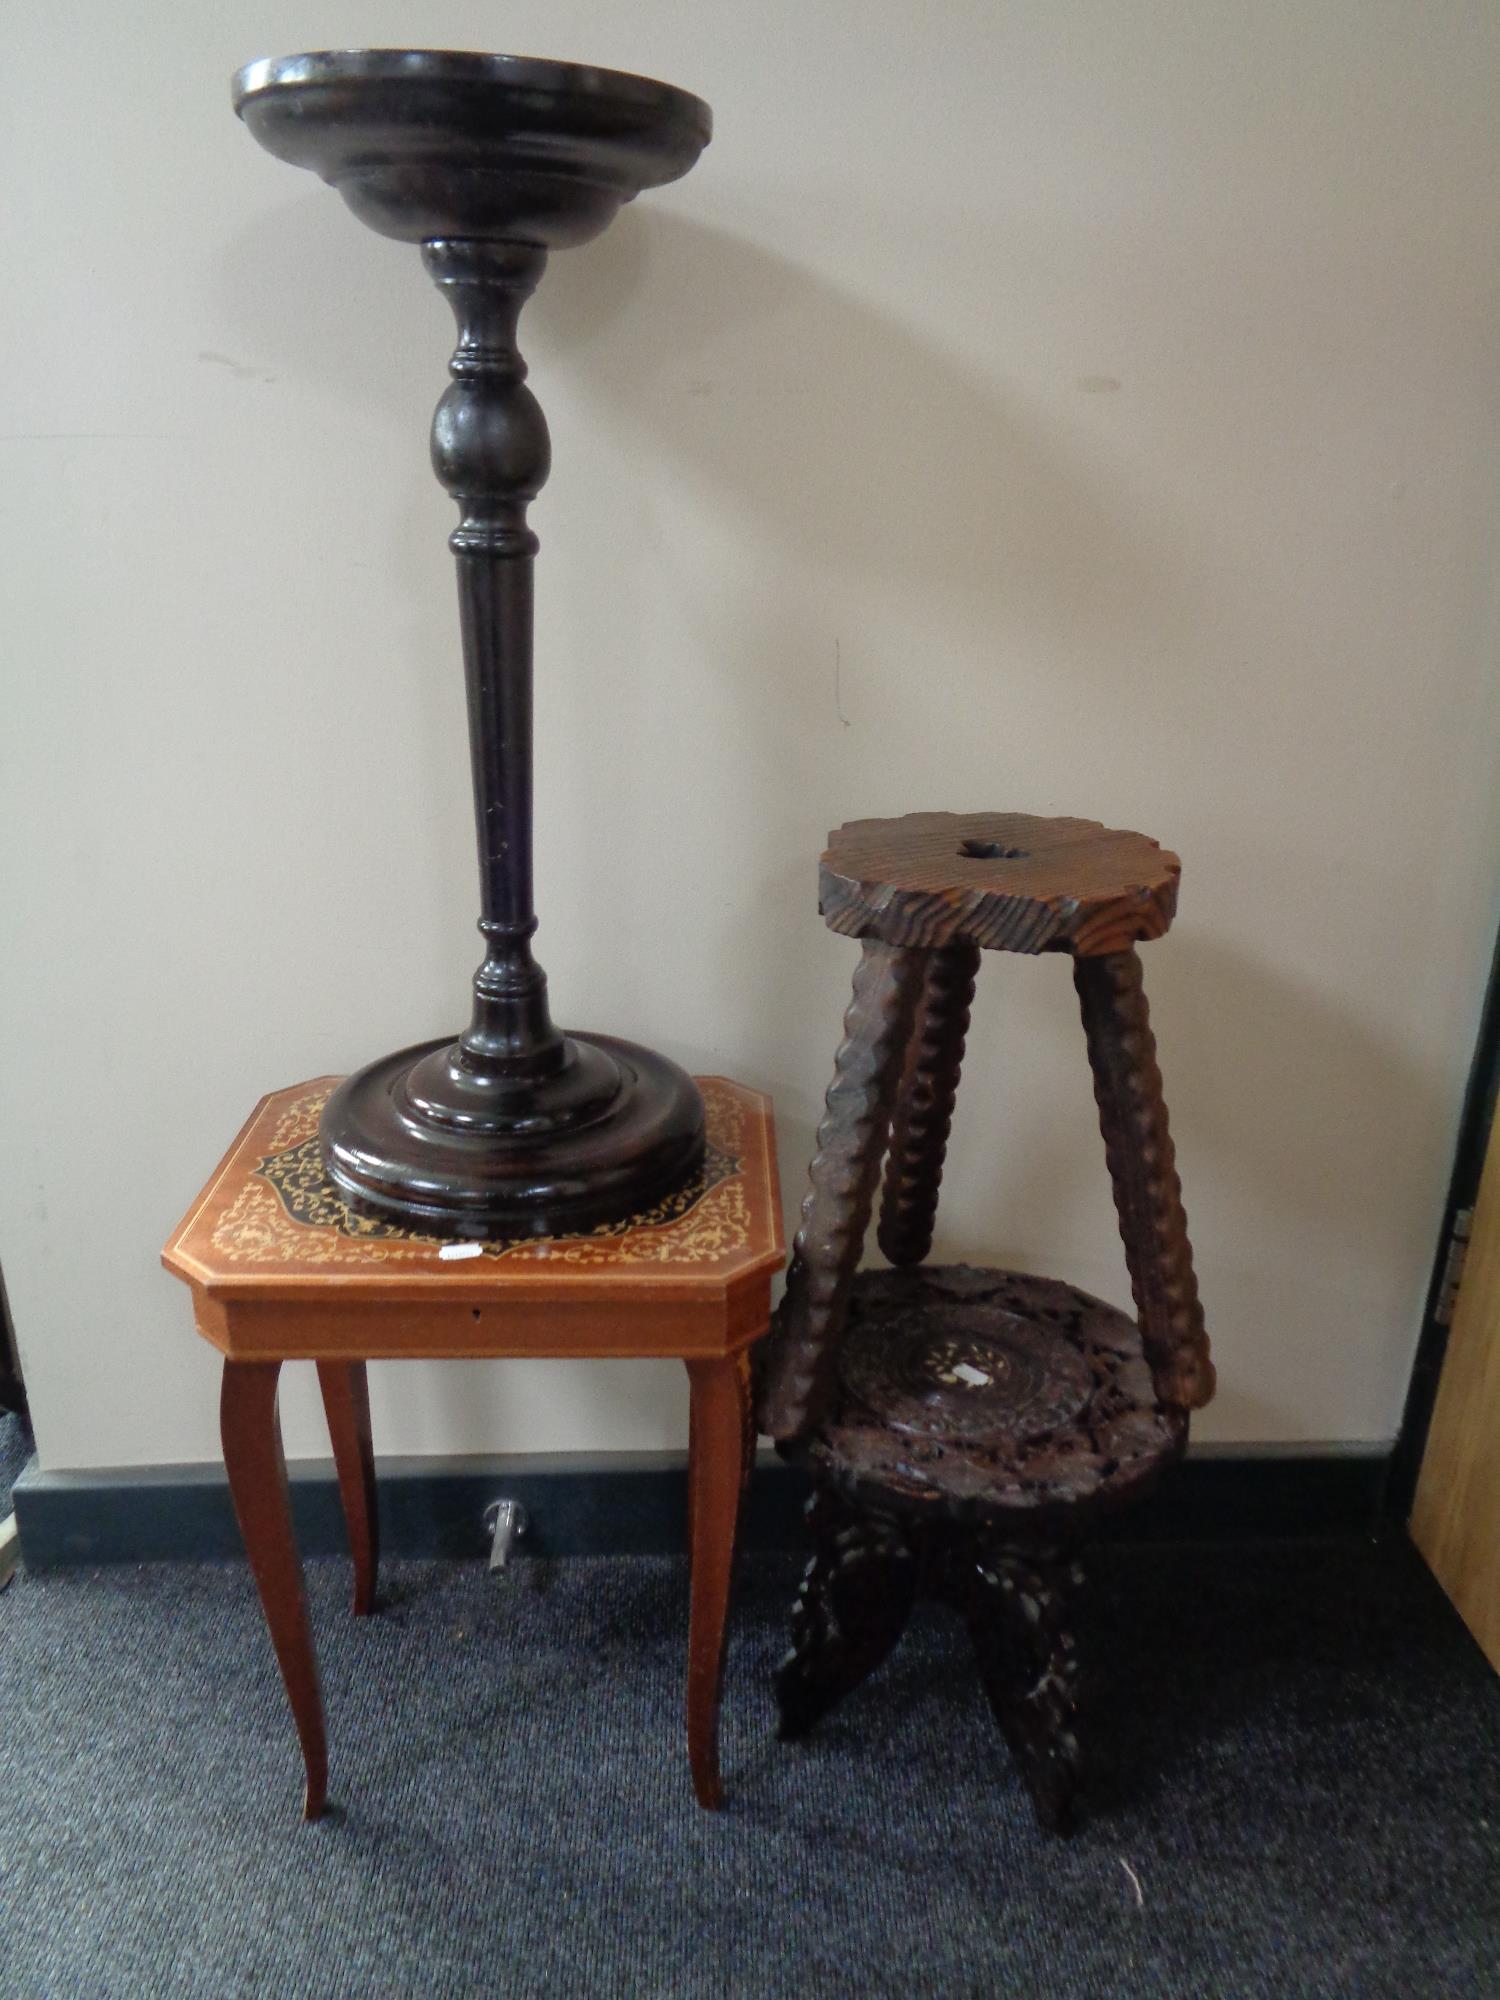 A music table together with a pine rustic stool and two plant stands